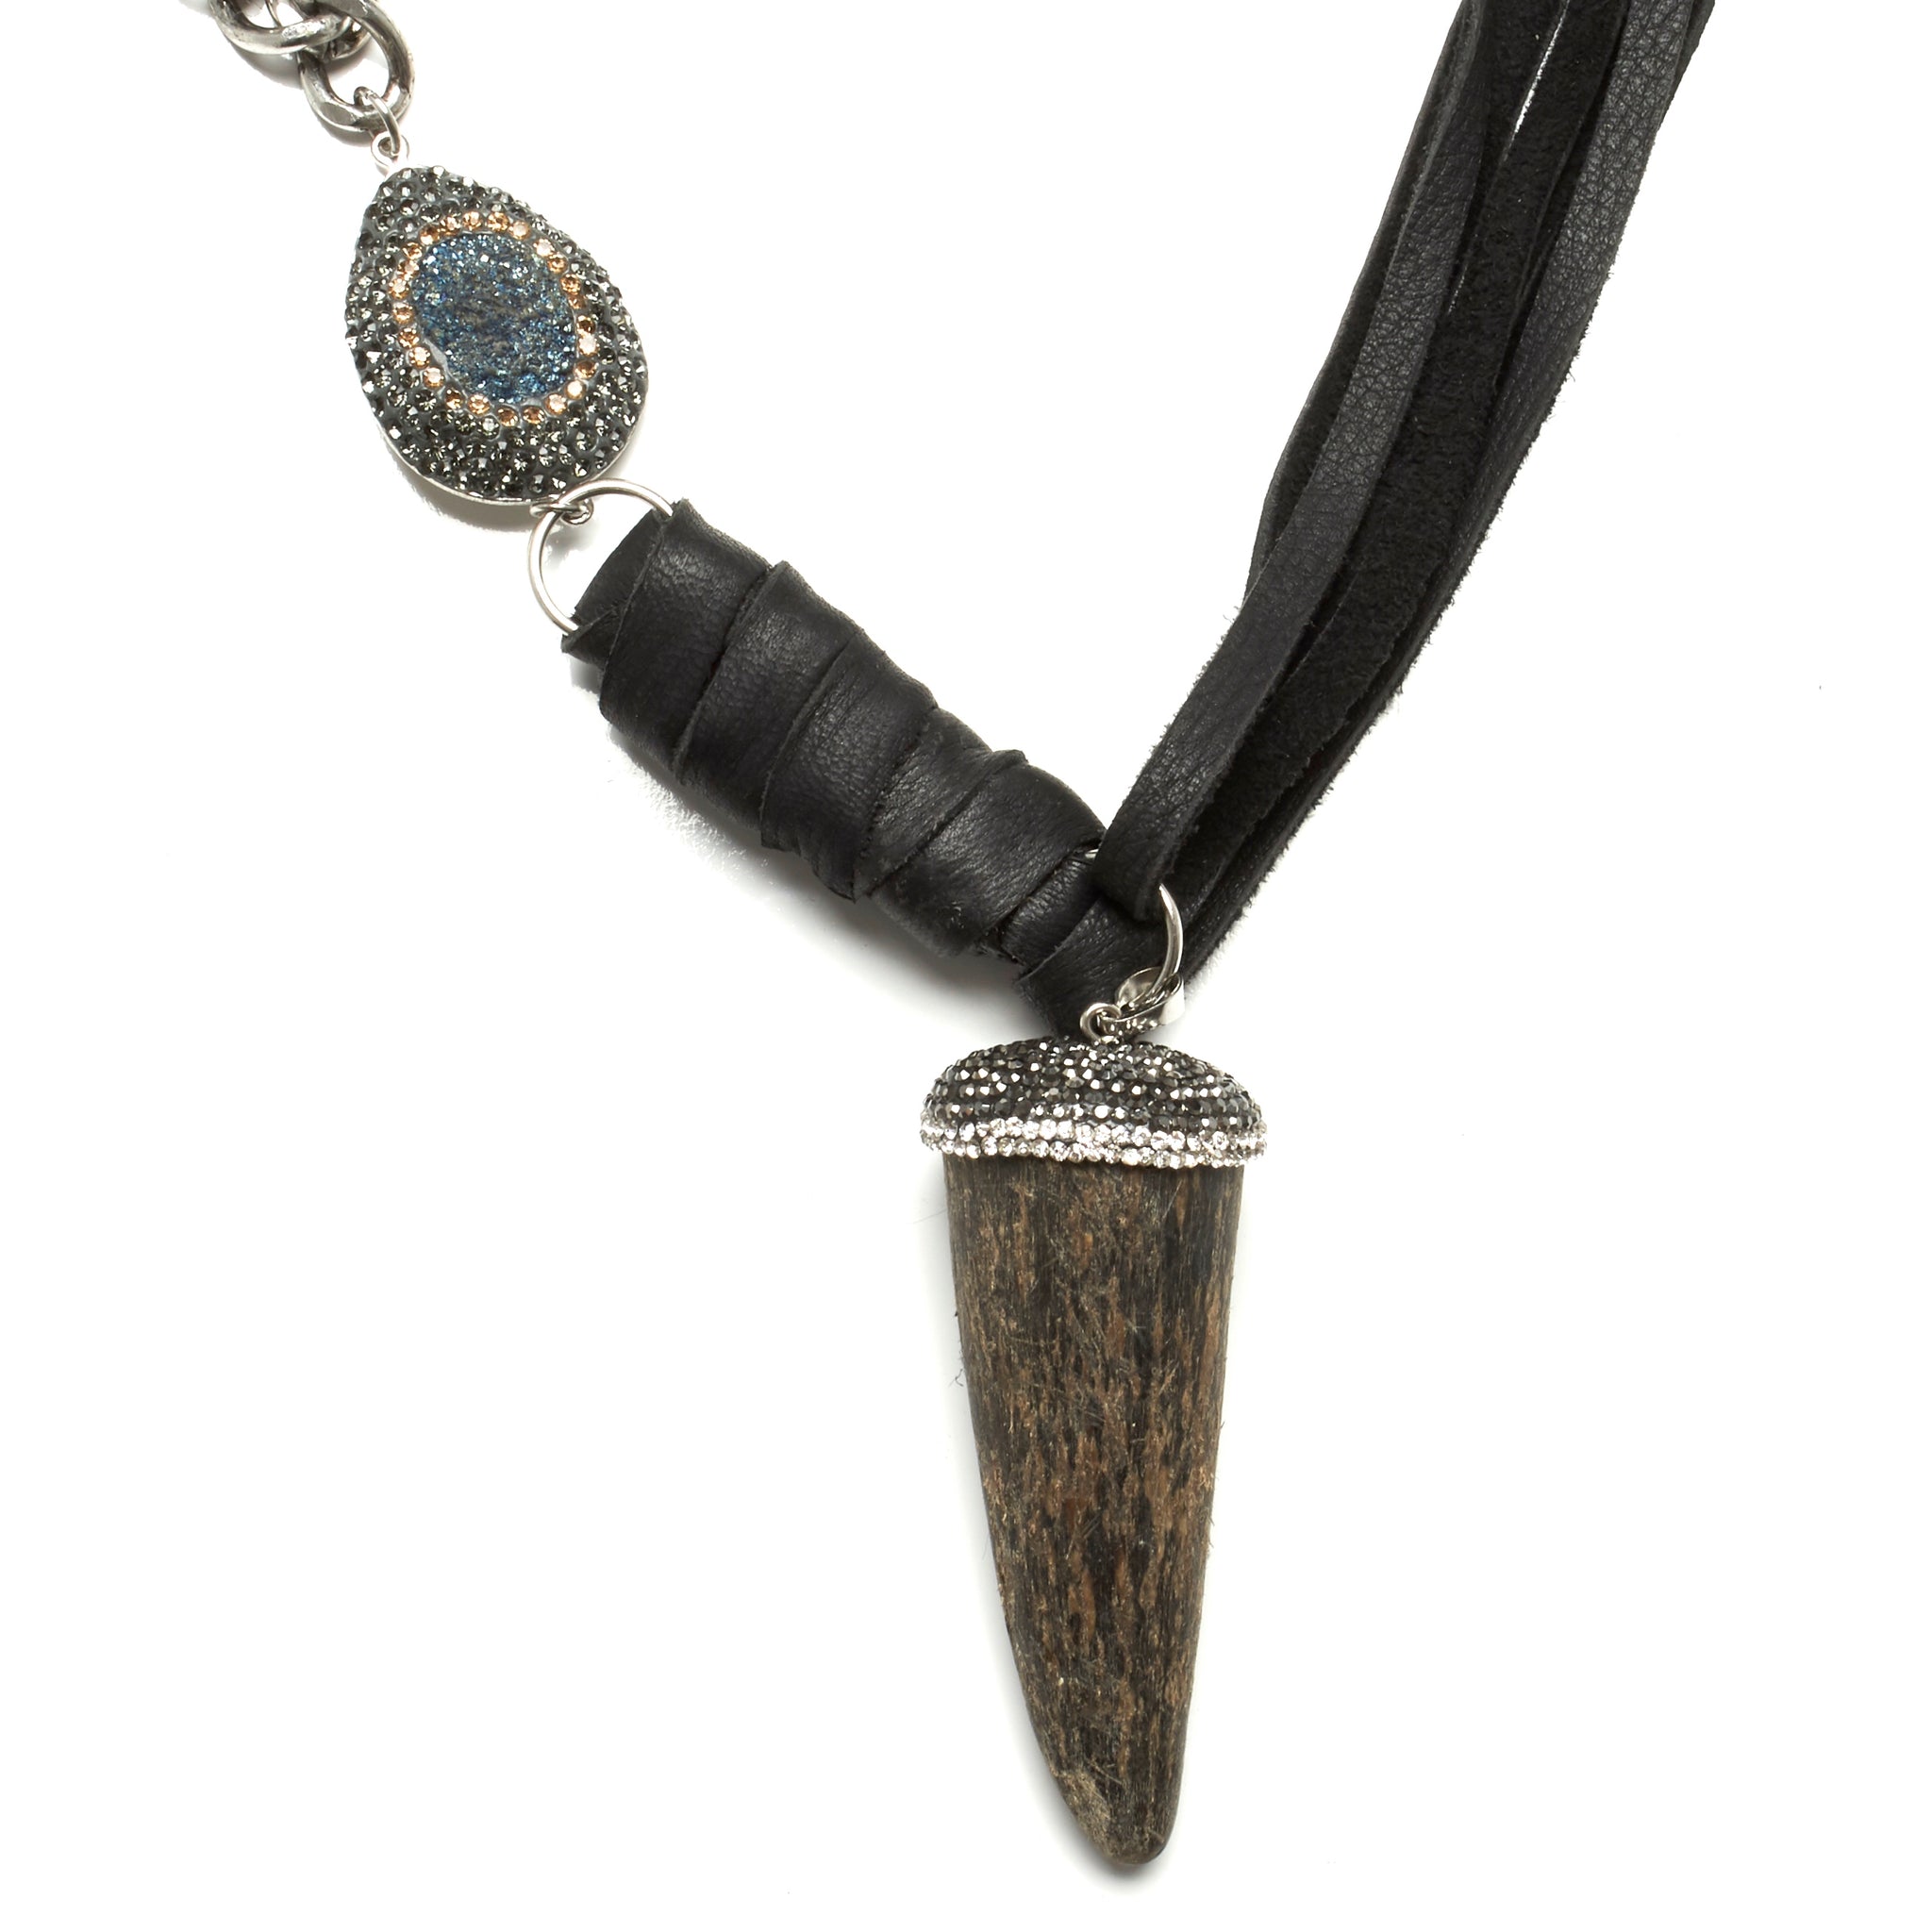 MULTI STRAND DEERSKIN LEATHER AND TWO STRANDS OF CHAIN NECKLACE WITH PAVE RHINESTONE, DRUZY ACCENT AND HORN PENDENT.  by nyet jewelry.